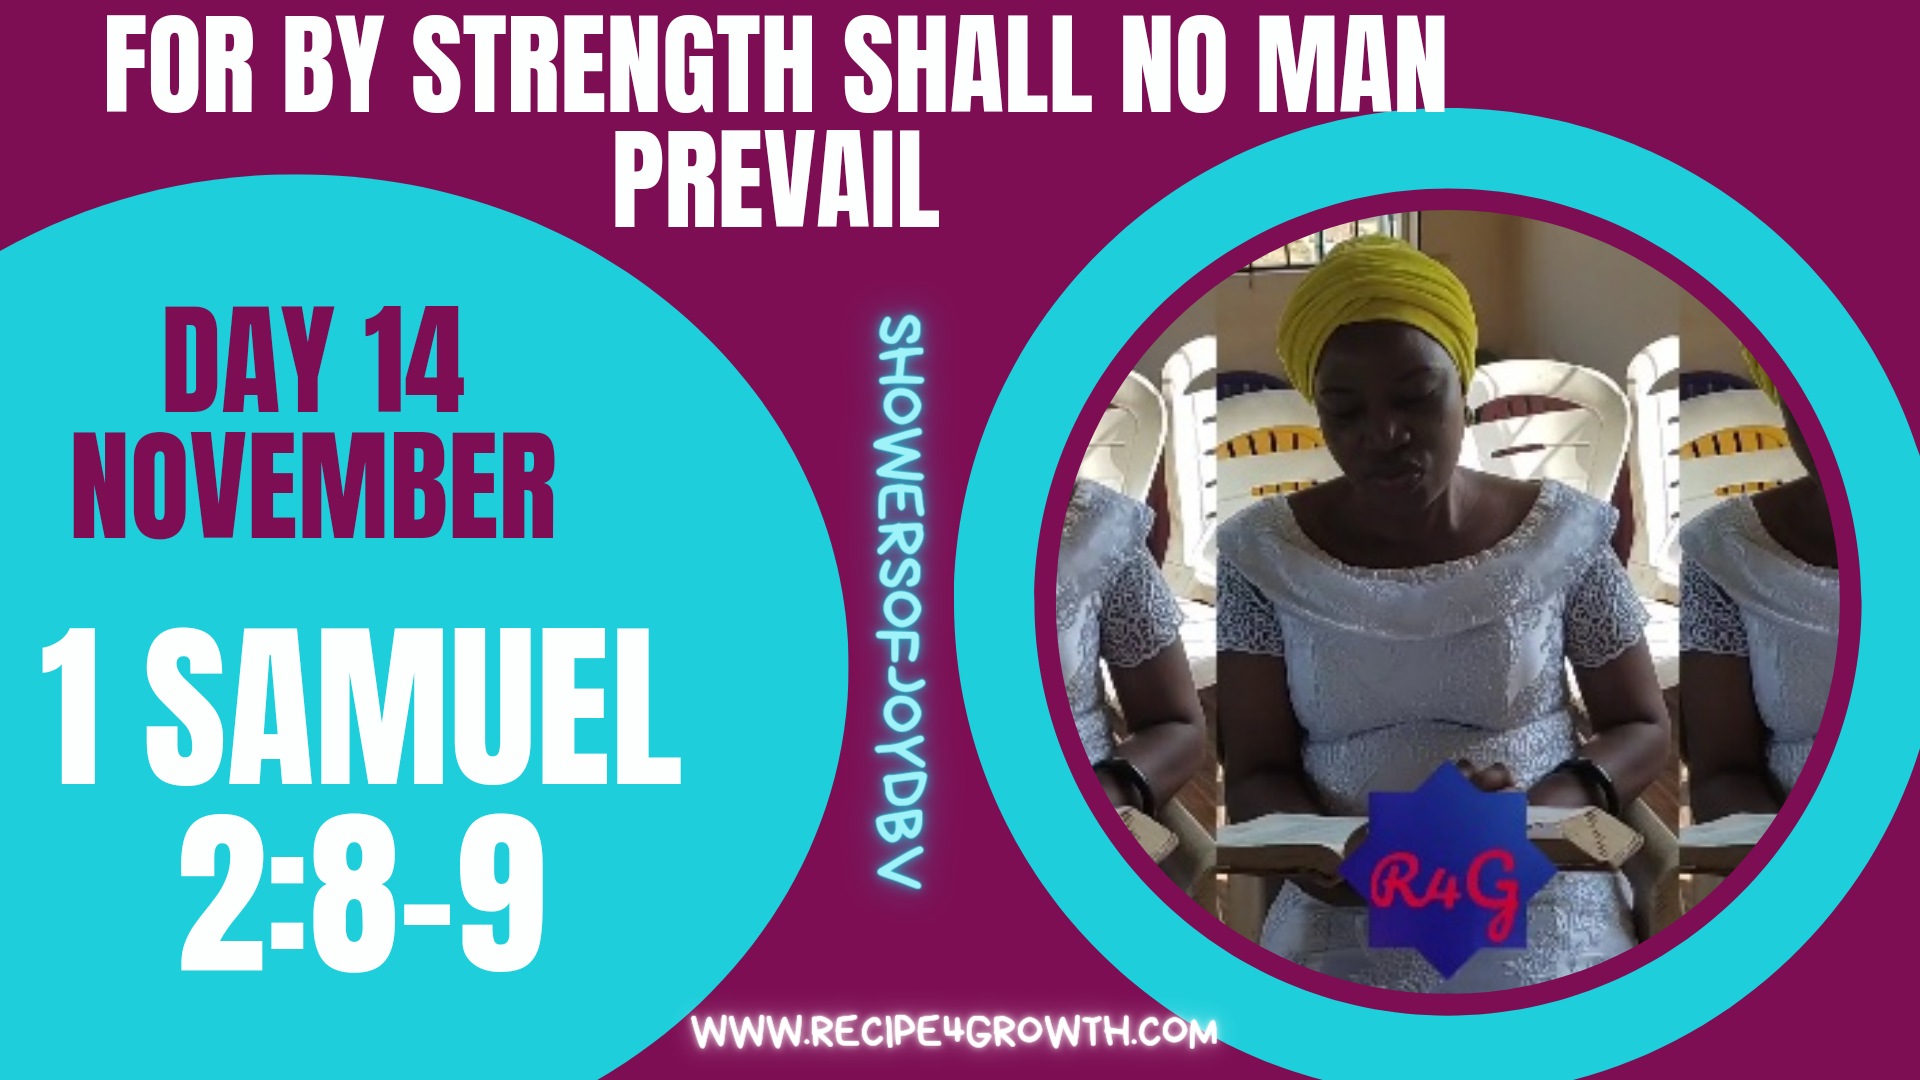 FOR BY STRENGTH SHALL NO MAN PREVAIL 1 SAMUEL 2:8-9